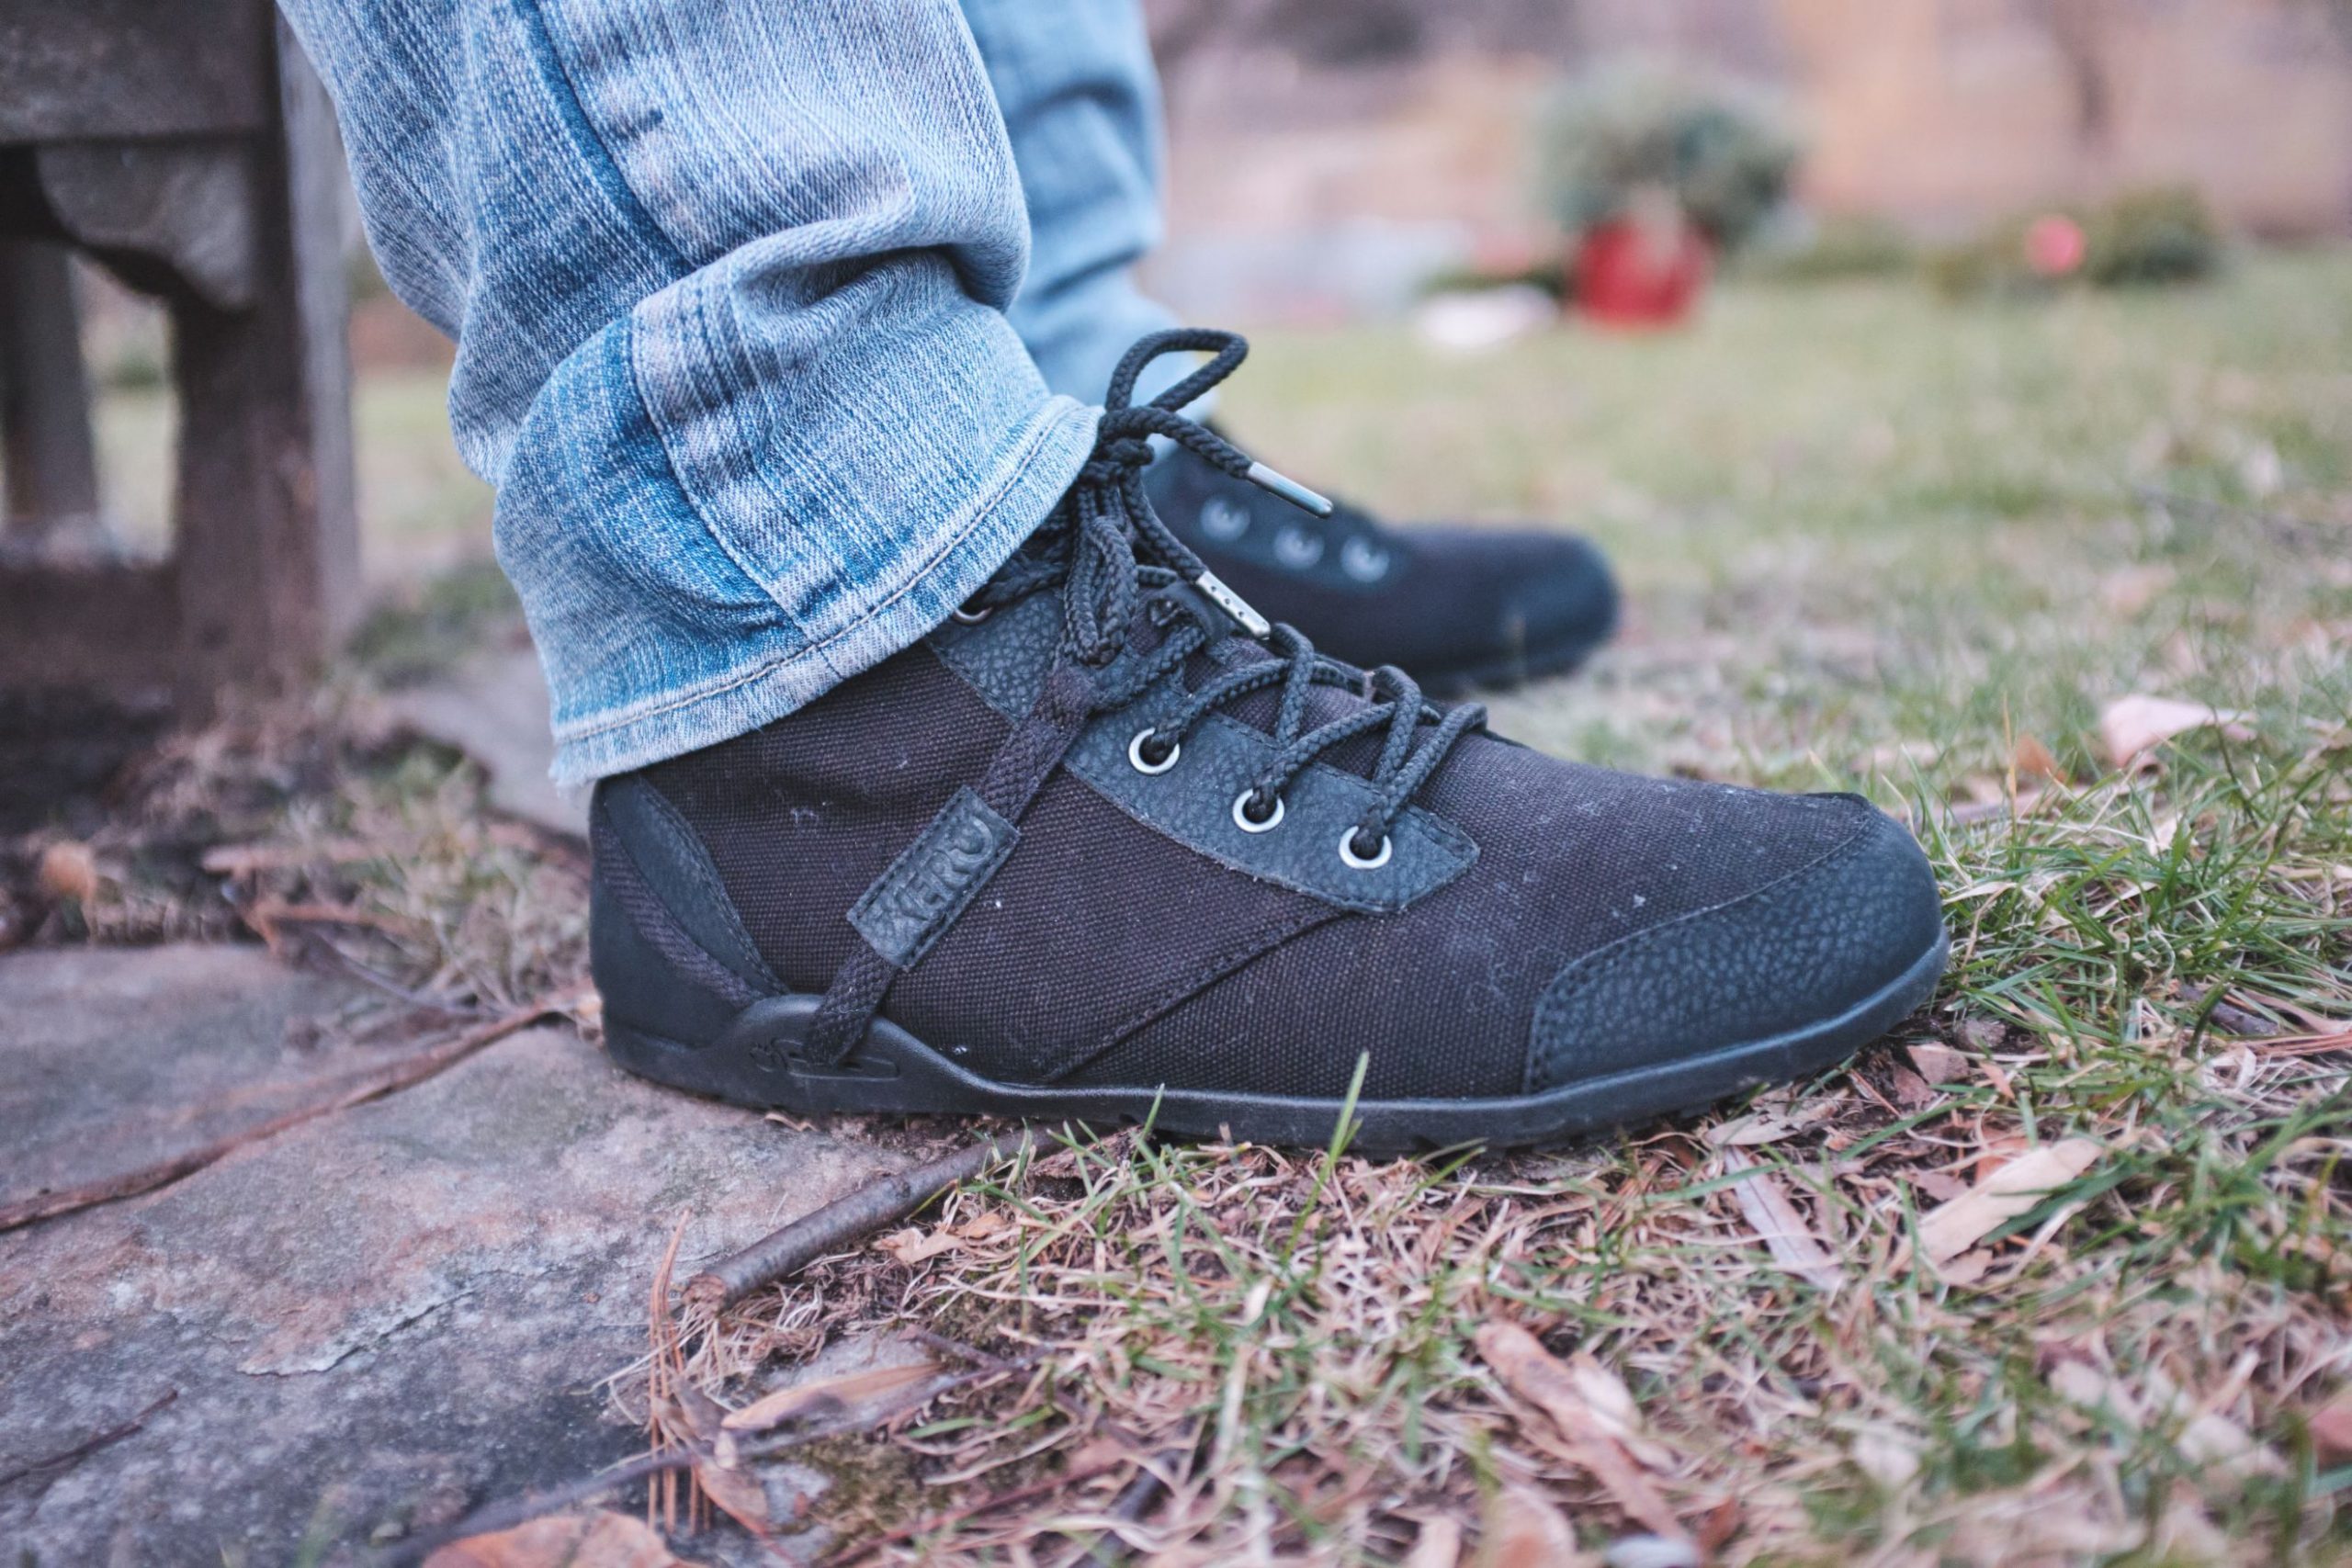 block Round and round Daddy Xero Shoes Denver Boot Review - Birthday Shoes - Toe Shoes, Barefoot or  Minimalist Shoes, and Vibram FiveFingers Reviews, News, Forums